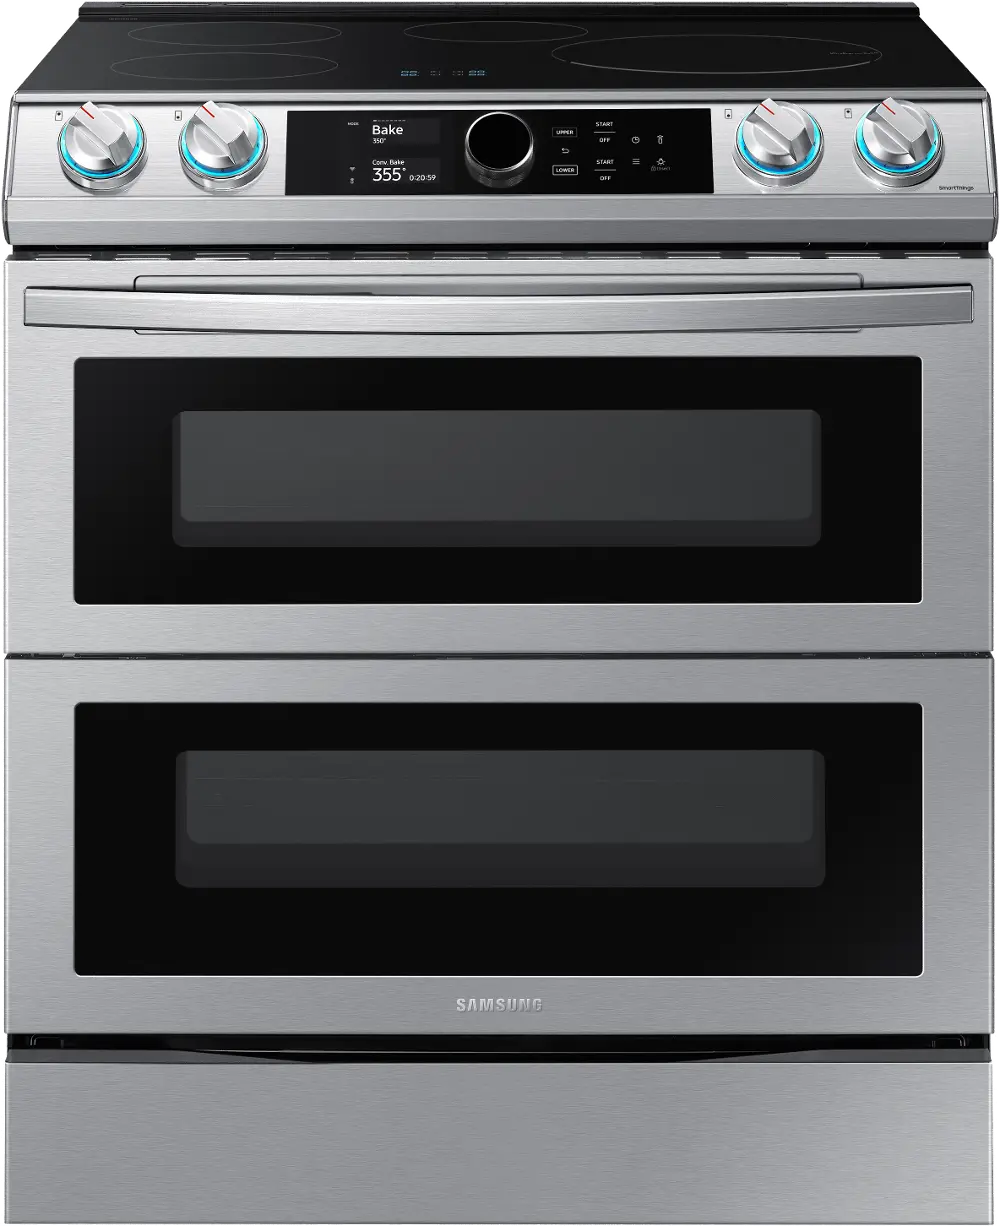 NE63T8951SS Samsung 6.3 cu ft Double Oven Induction Range - Stainless Steel-1